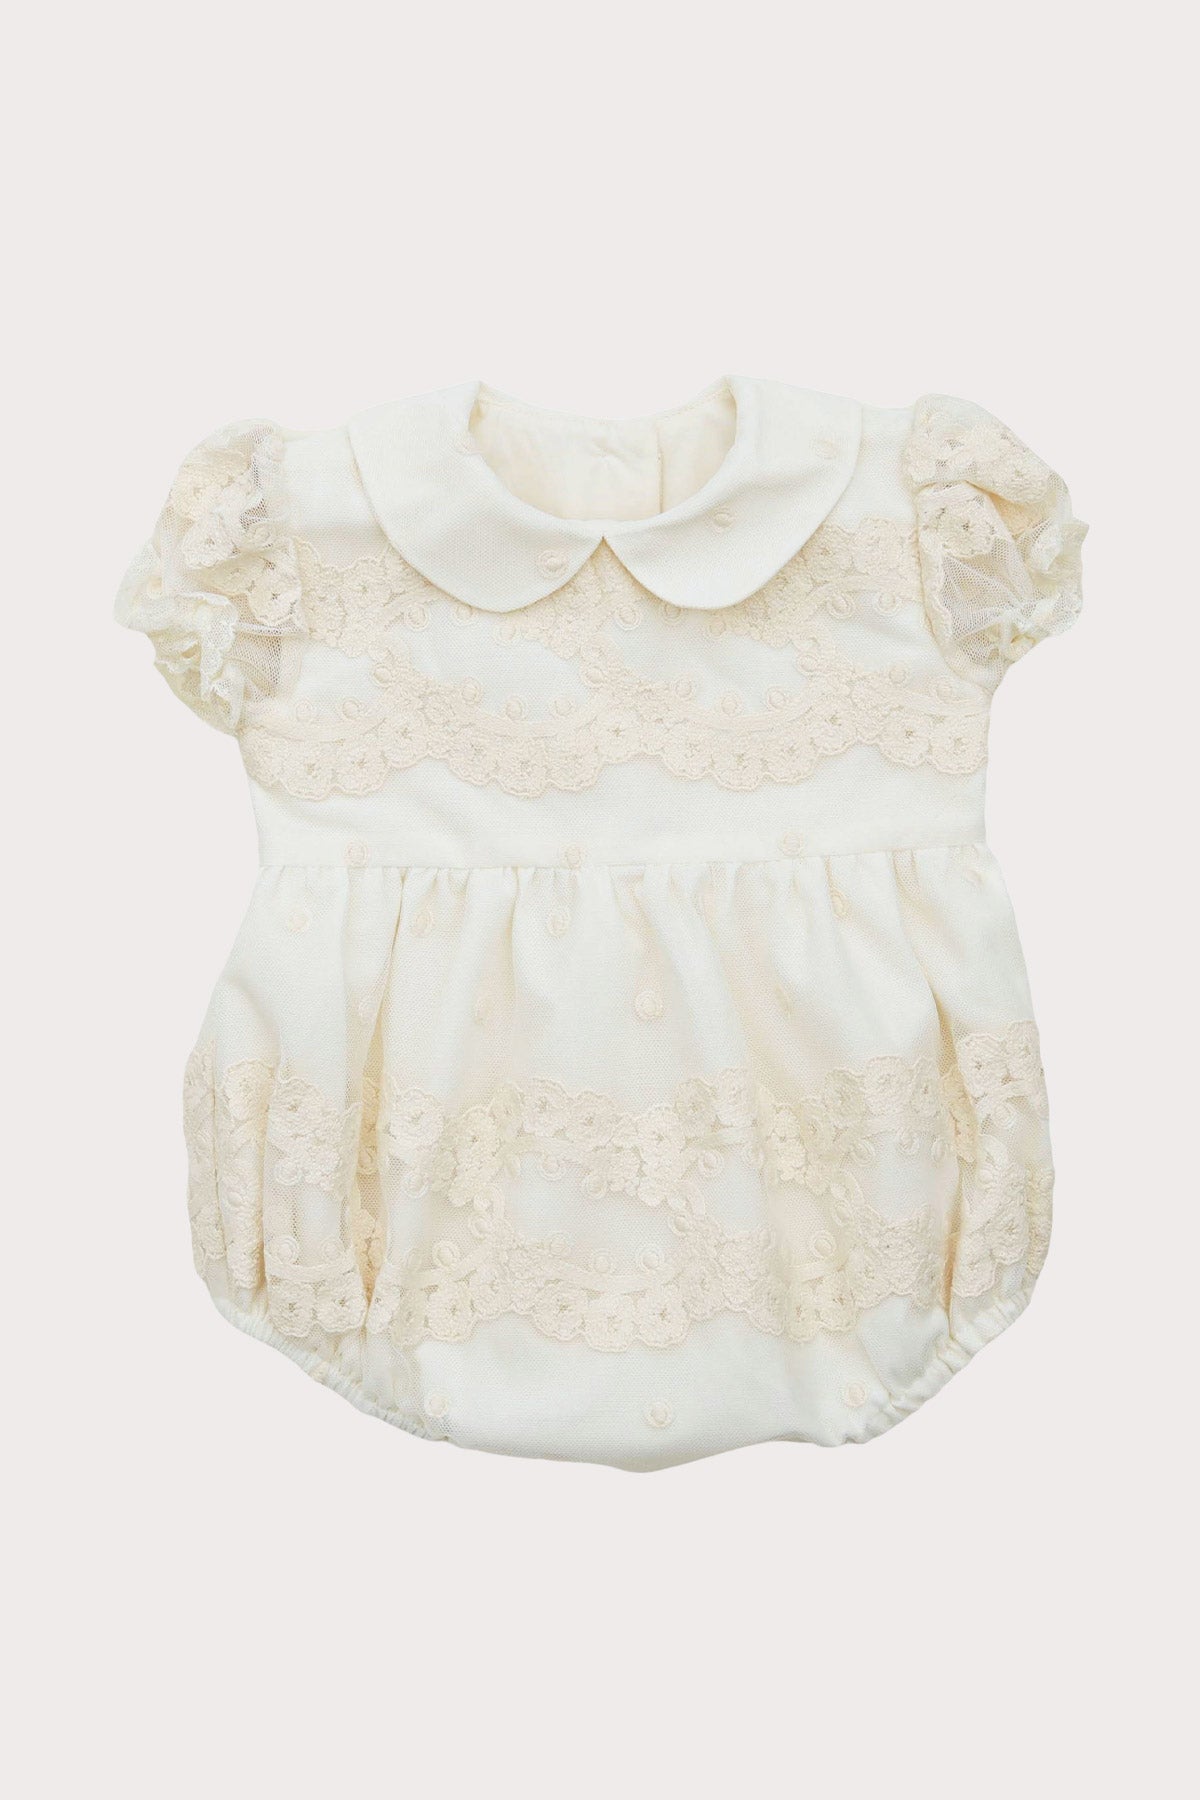 ivory lace baby girl romper